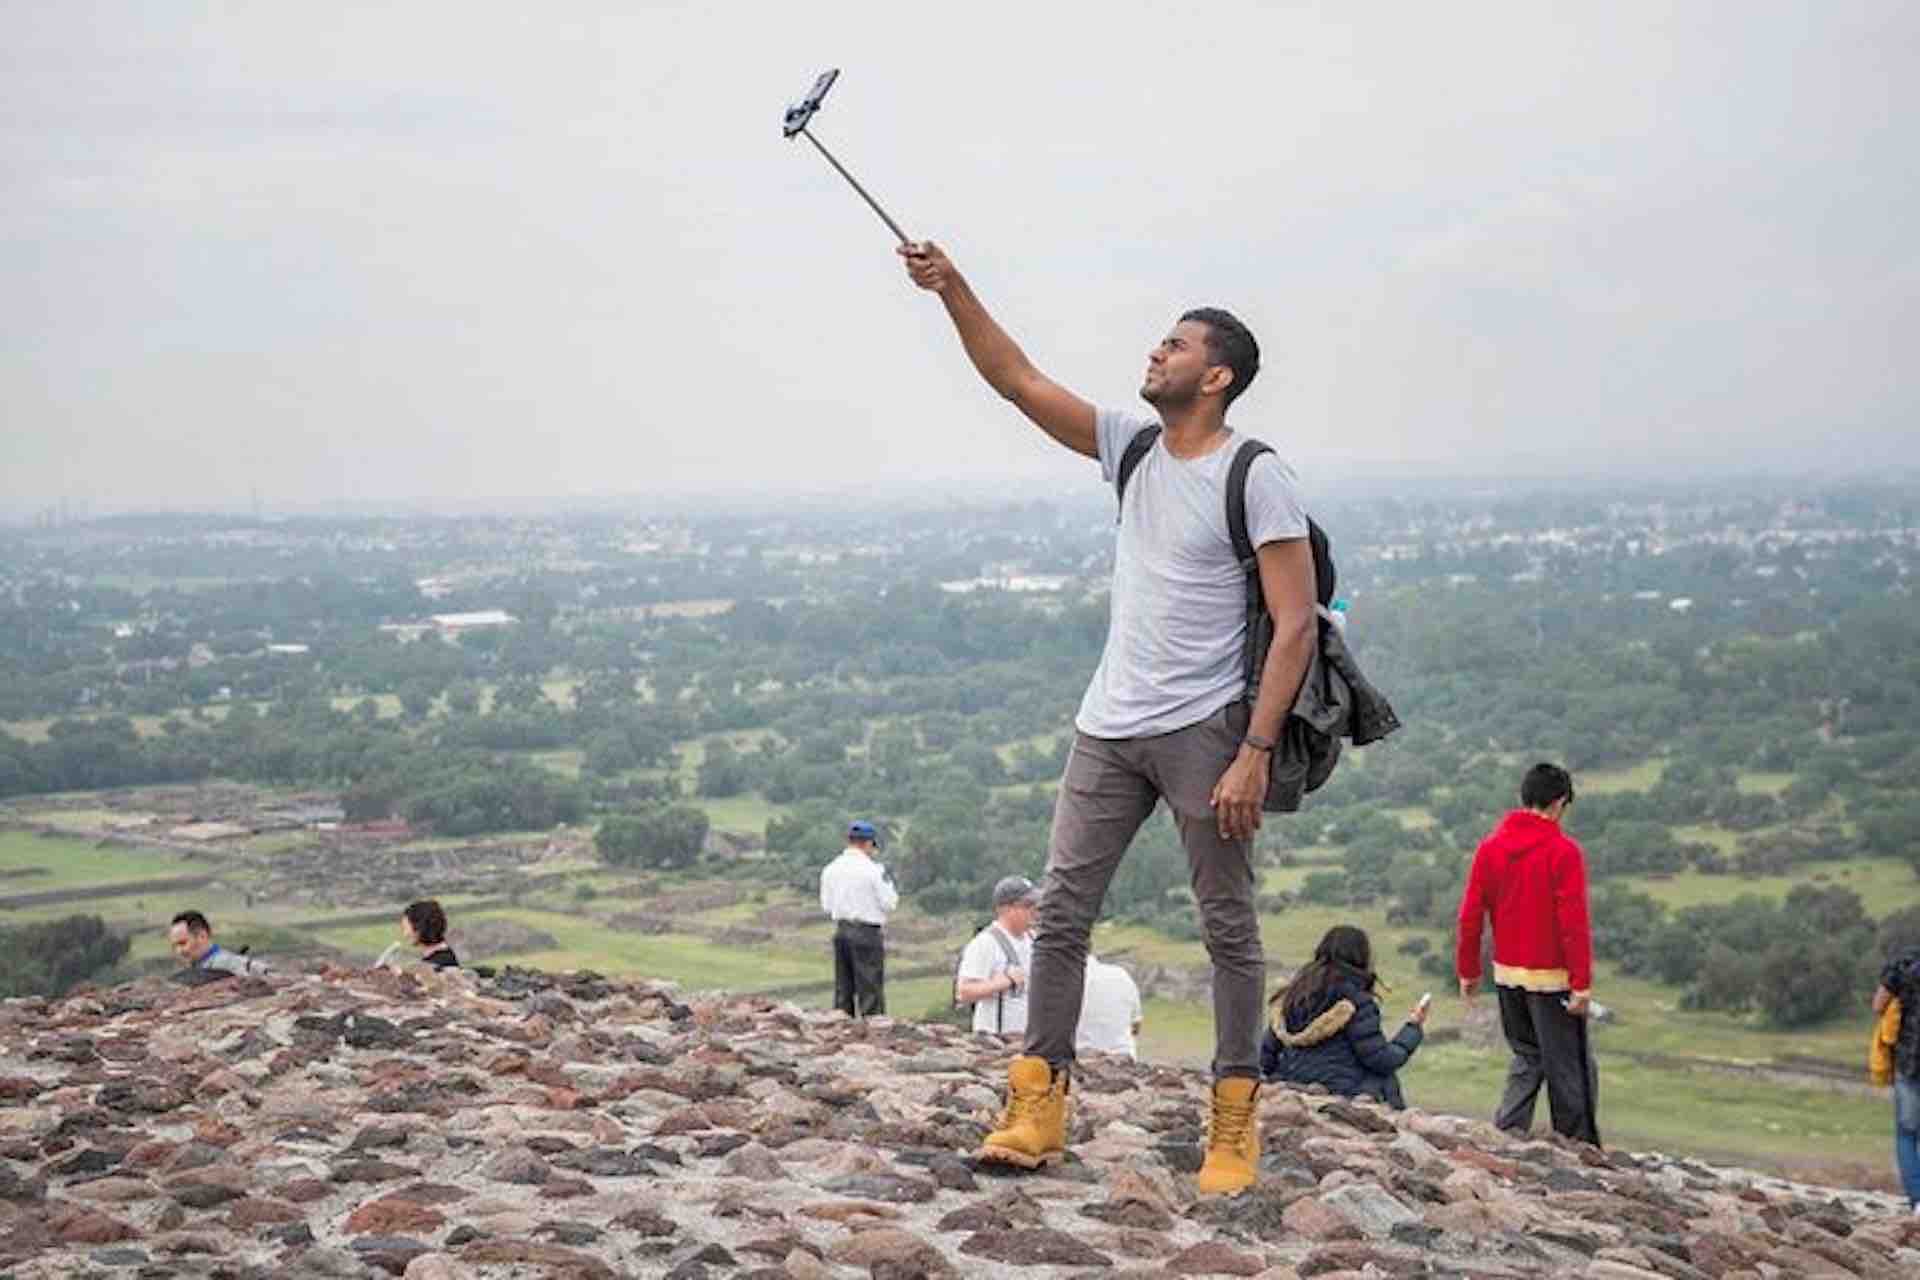 Teotihuacán visitor taking selfie atop pyramid during tour